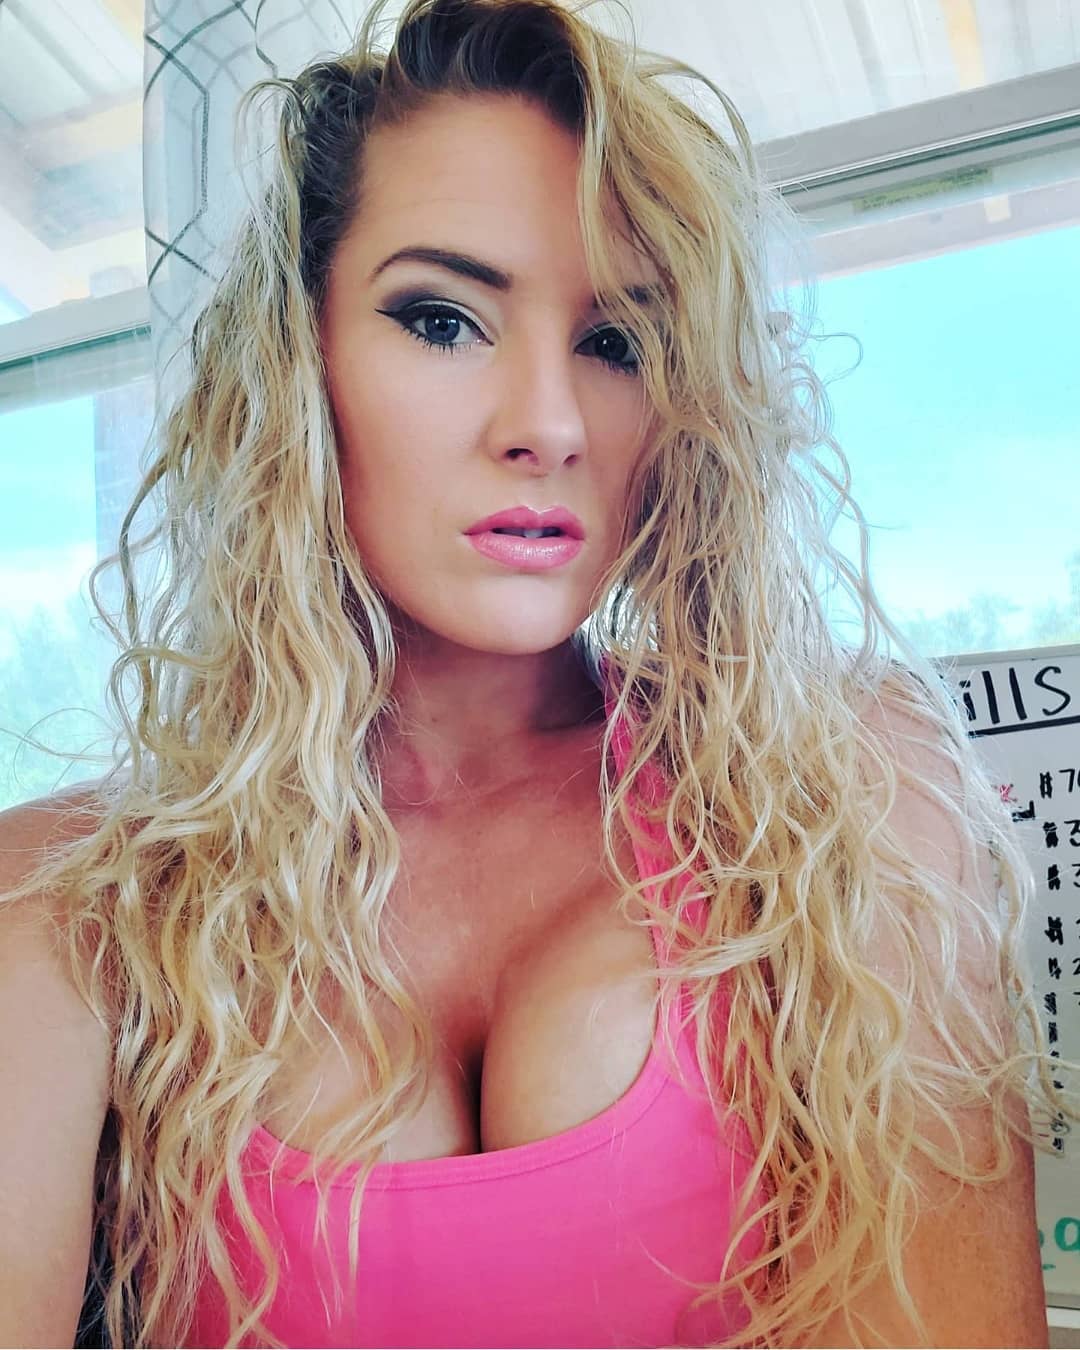 The Offical Women of Wrestling Pics/Gifs/Videos Thread 